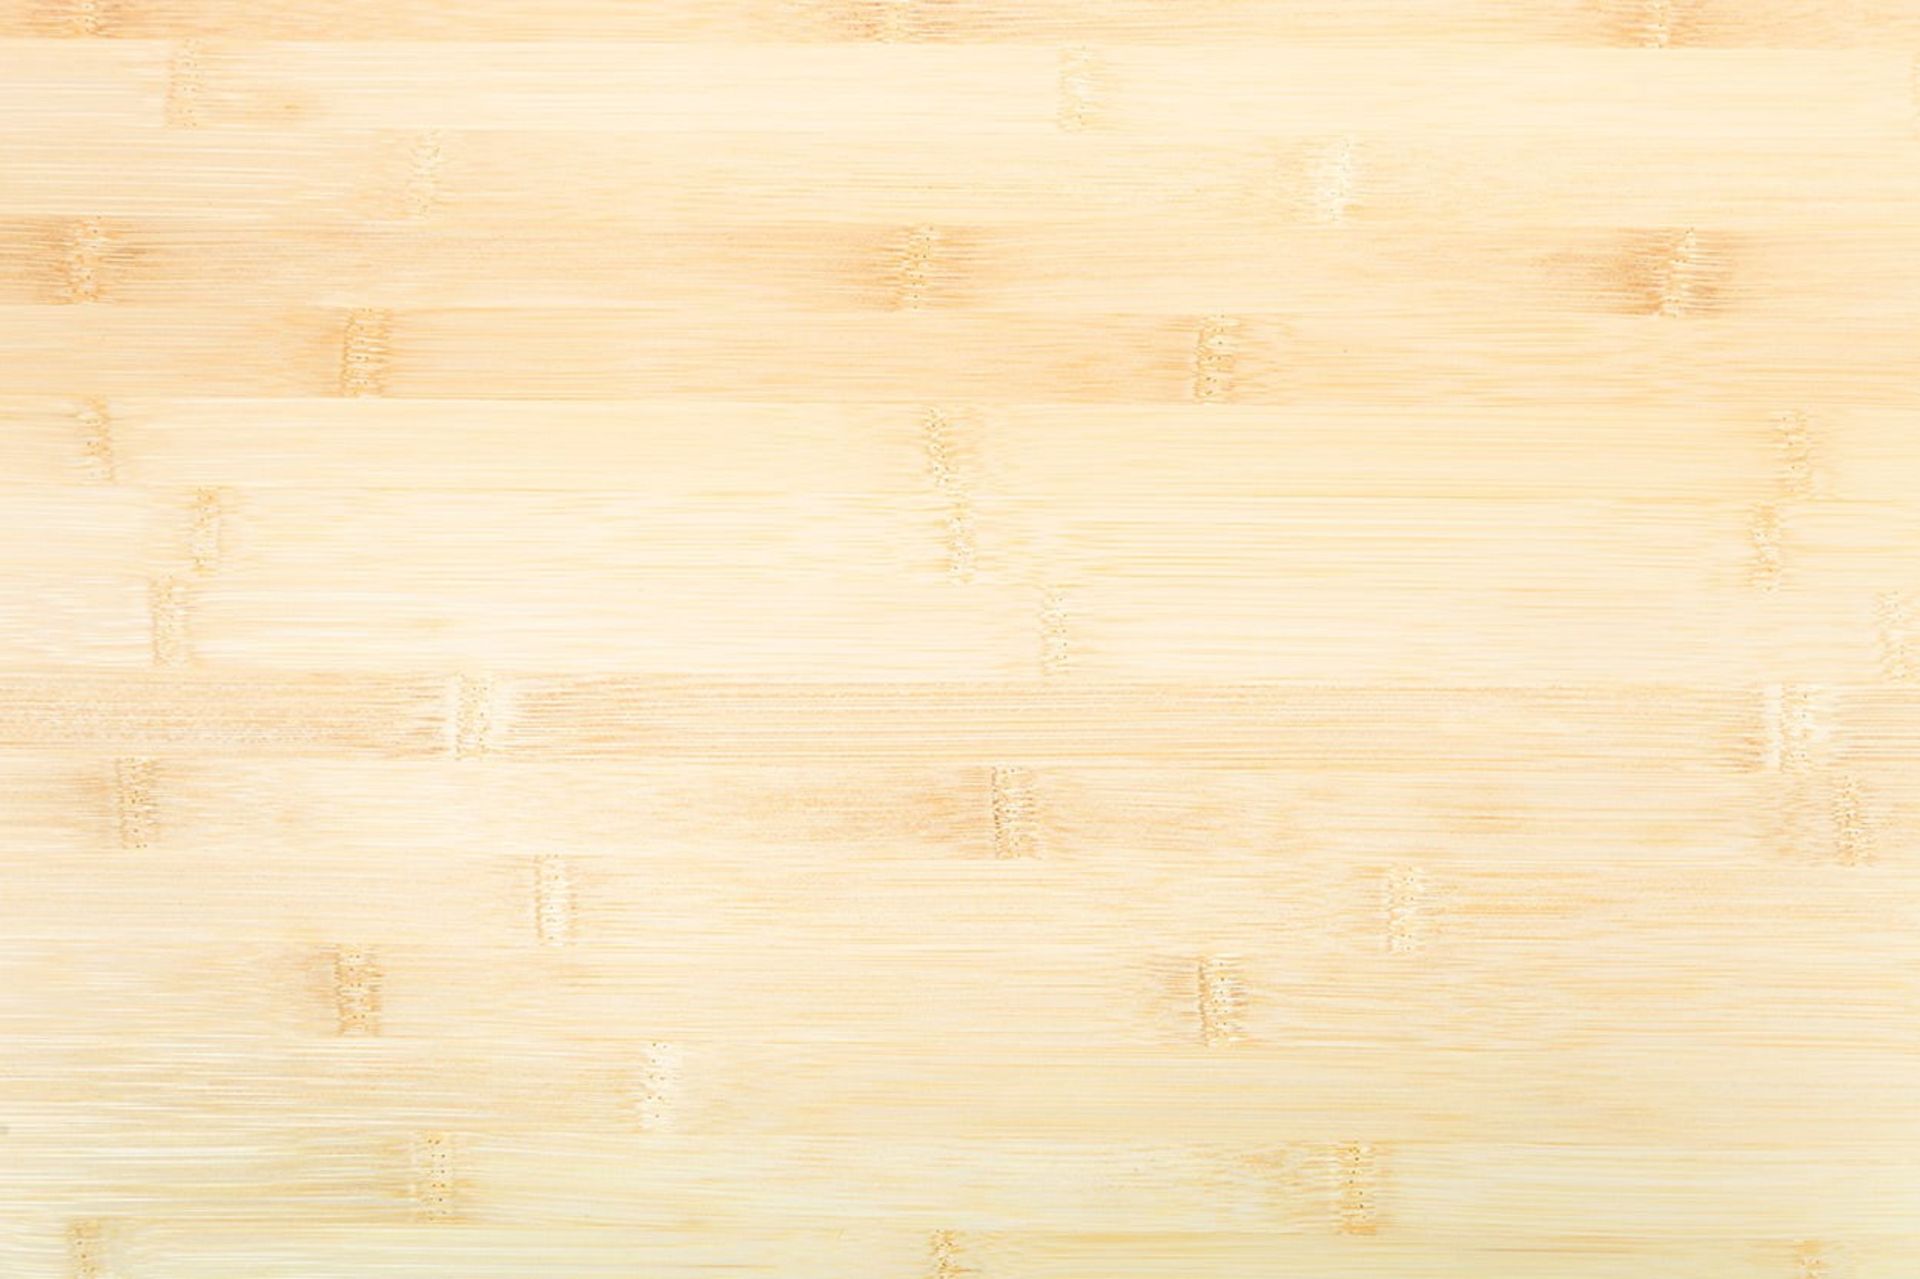 1 x Layered Solid Bamboo Wood Worktop - Size: 4000 x 650 x 40mm - Ideal For Kitchens, Countertops, - Image 4 of 4